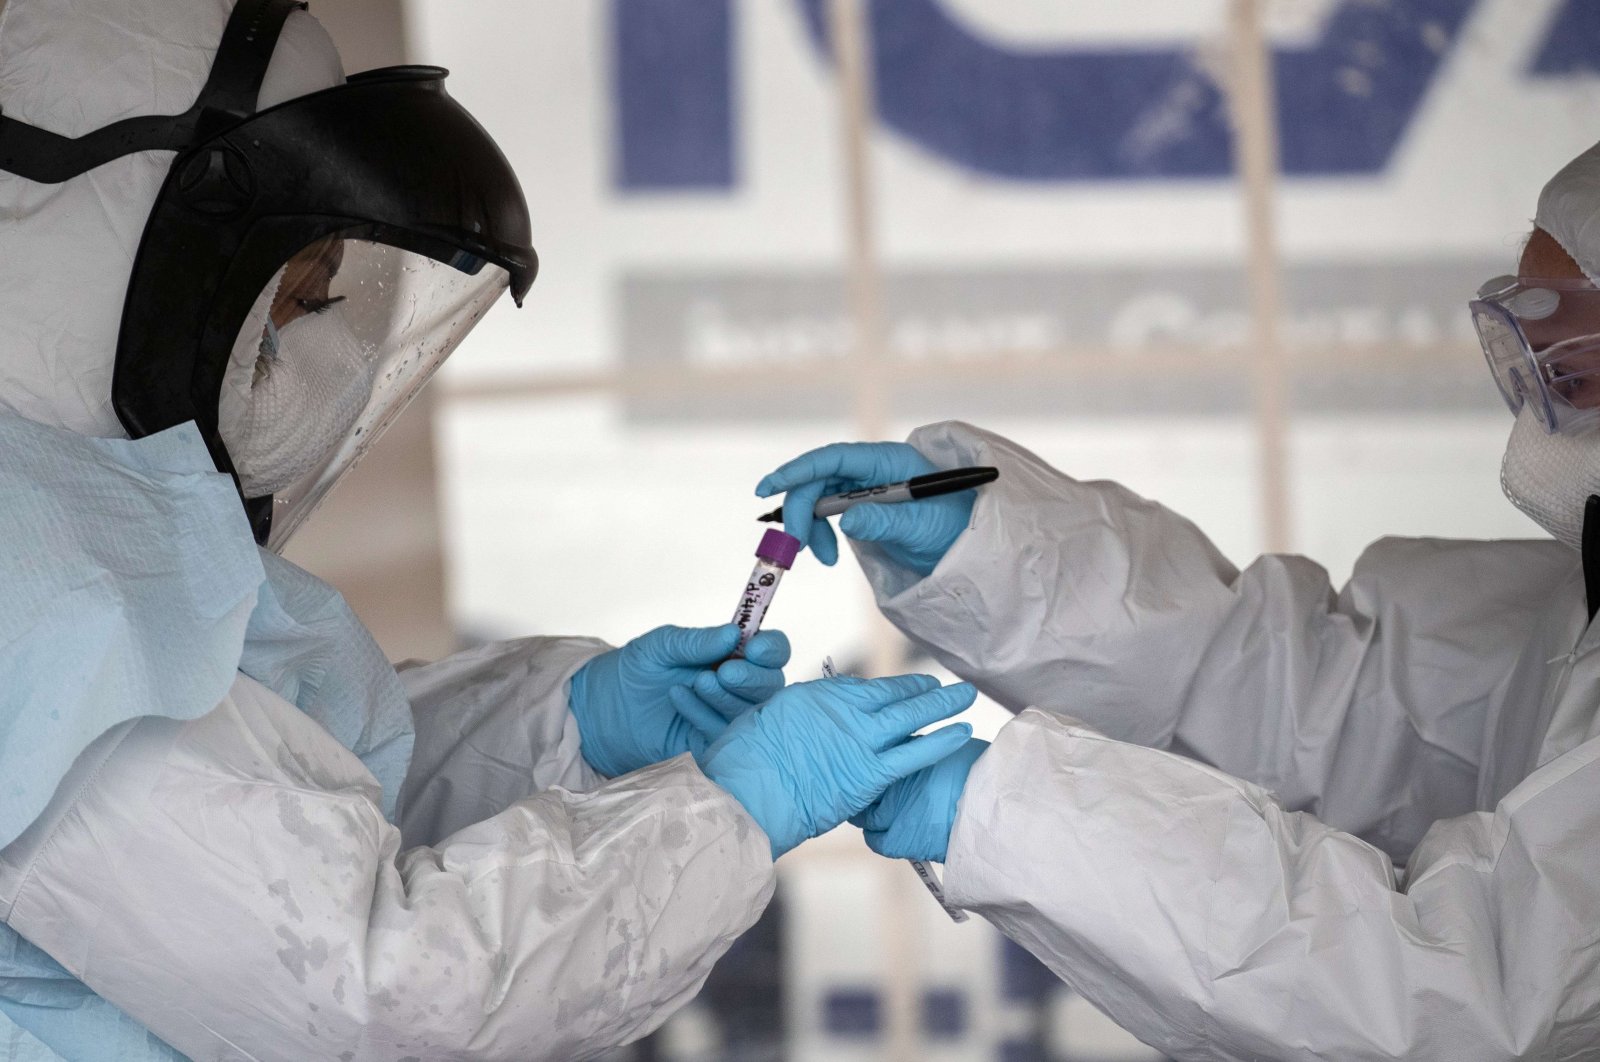 Health workers dressed in personal protective equipment (PPE) handle a coronavirus test at a drive-thru testing station at Cummings Park on March 23, 2020 in Stamford, Connecticut. (AFP Photo)